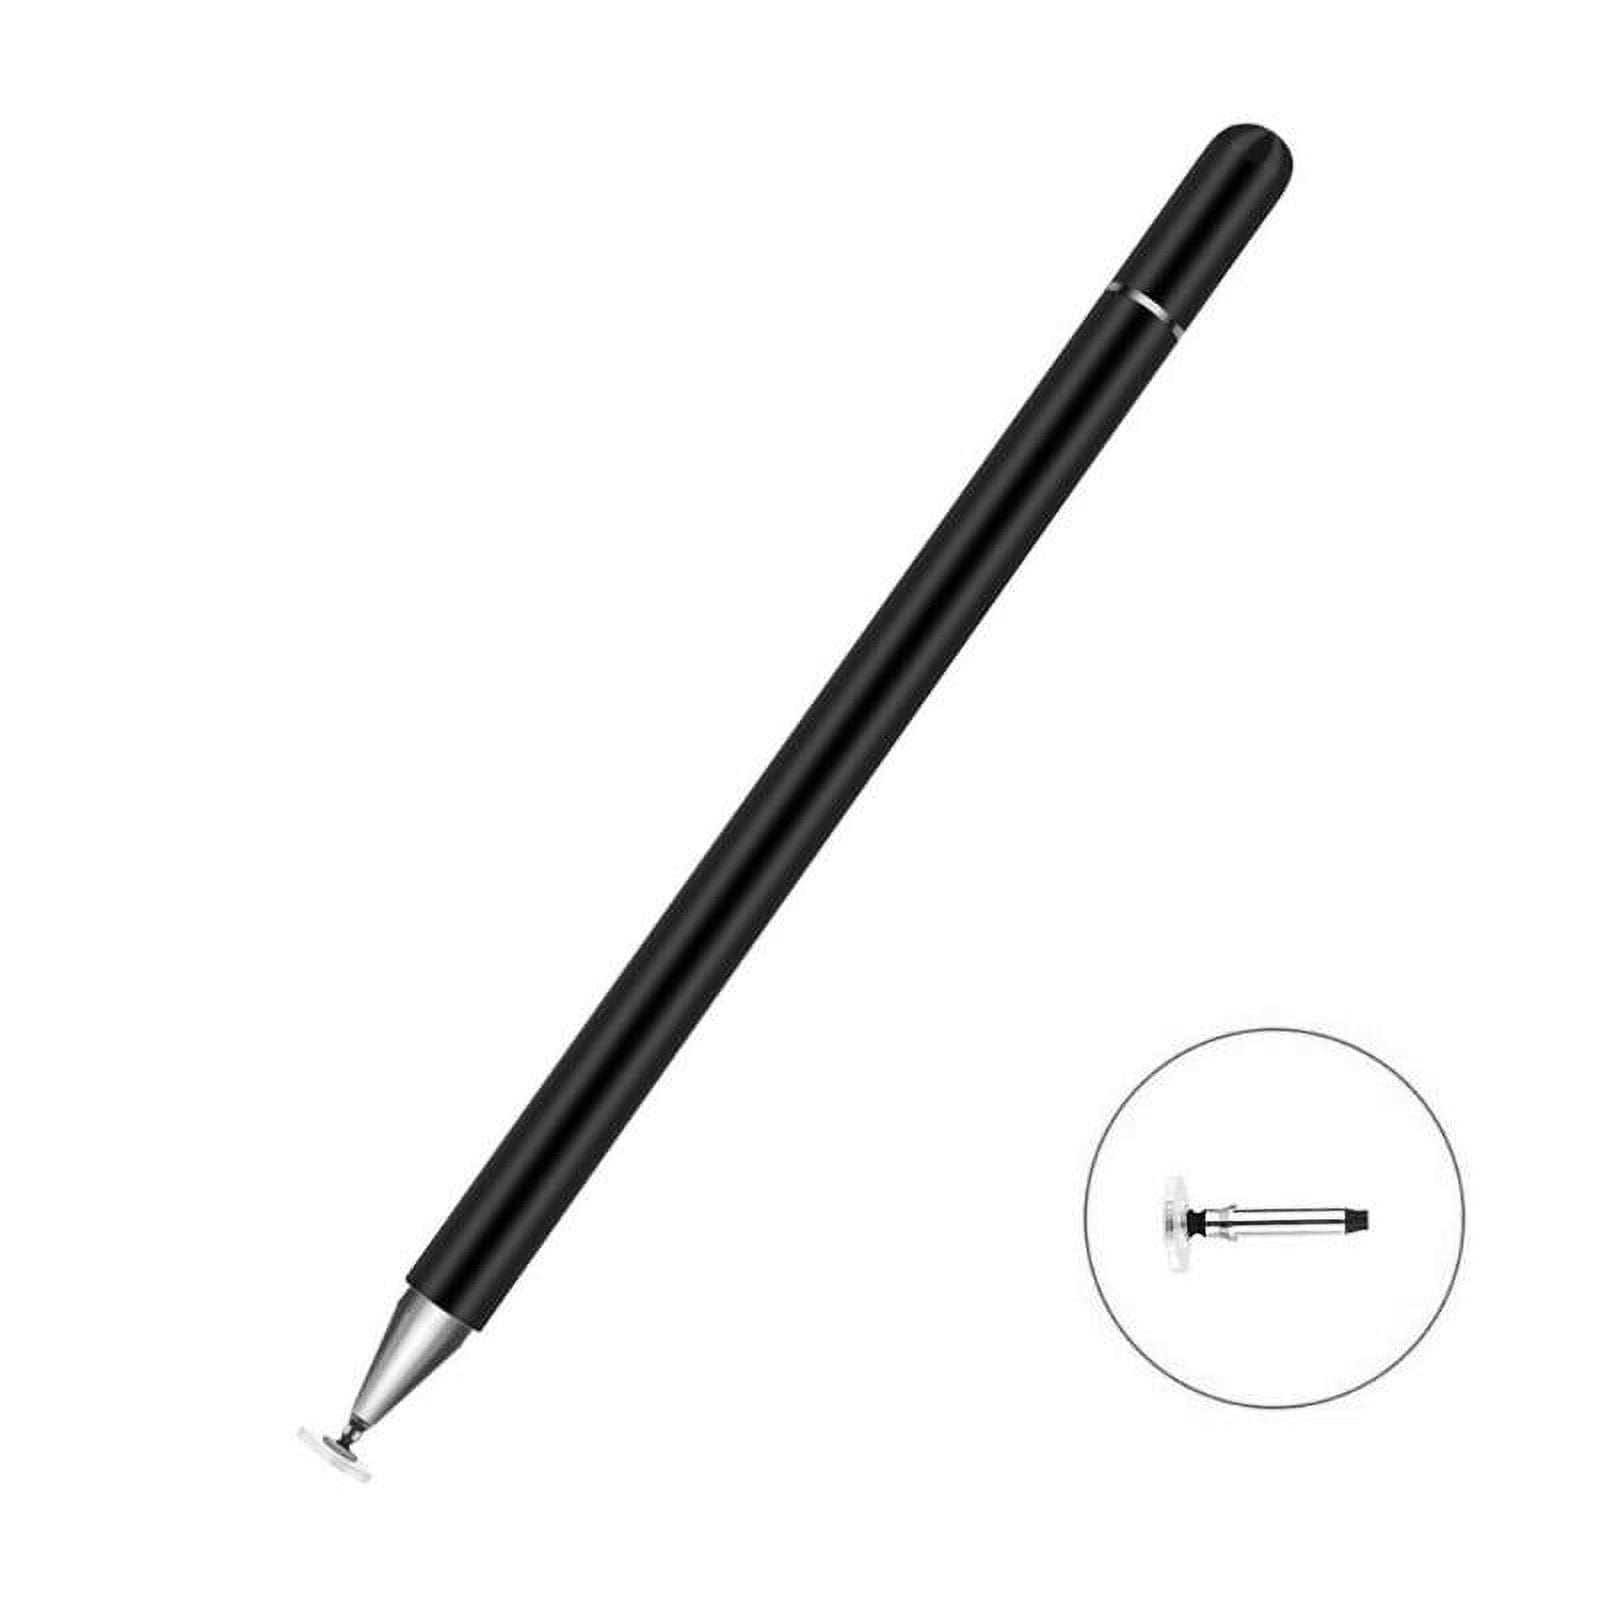 Stylus Pens for Touch Screens, Disc Stylus Pen, Compatible with iPad  pro/Mini/Air/iPhone/Android/Microsoft Tablets (Black/White/Rose Gold)